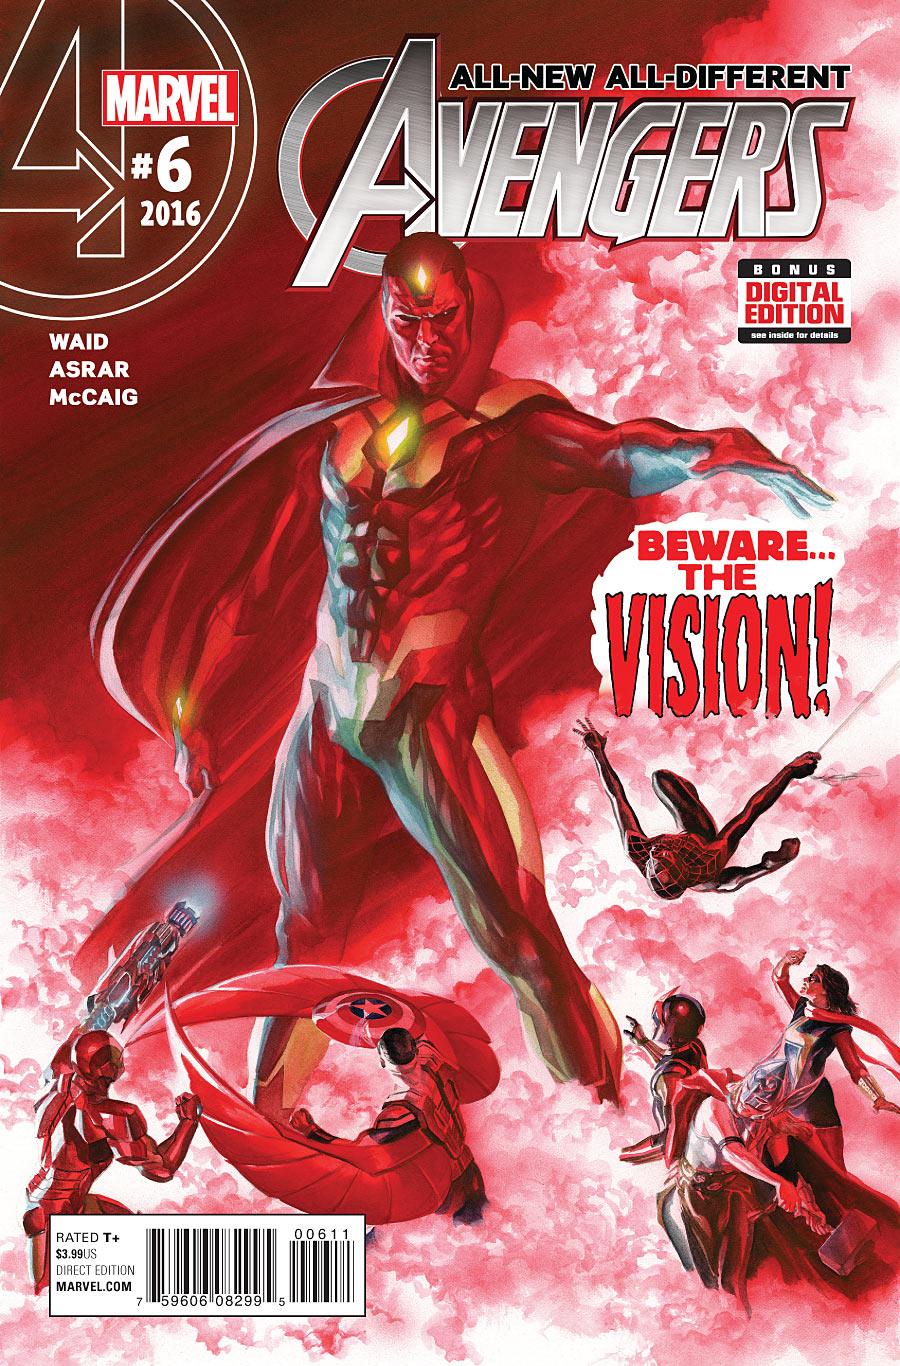 All-New, All-Different Avengers Vol. 1 #6